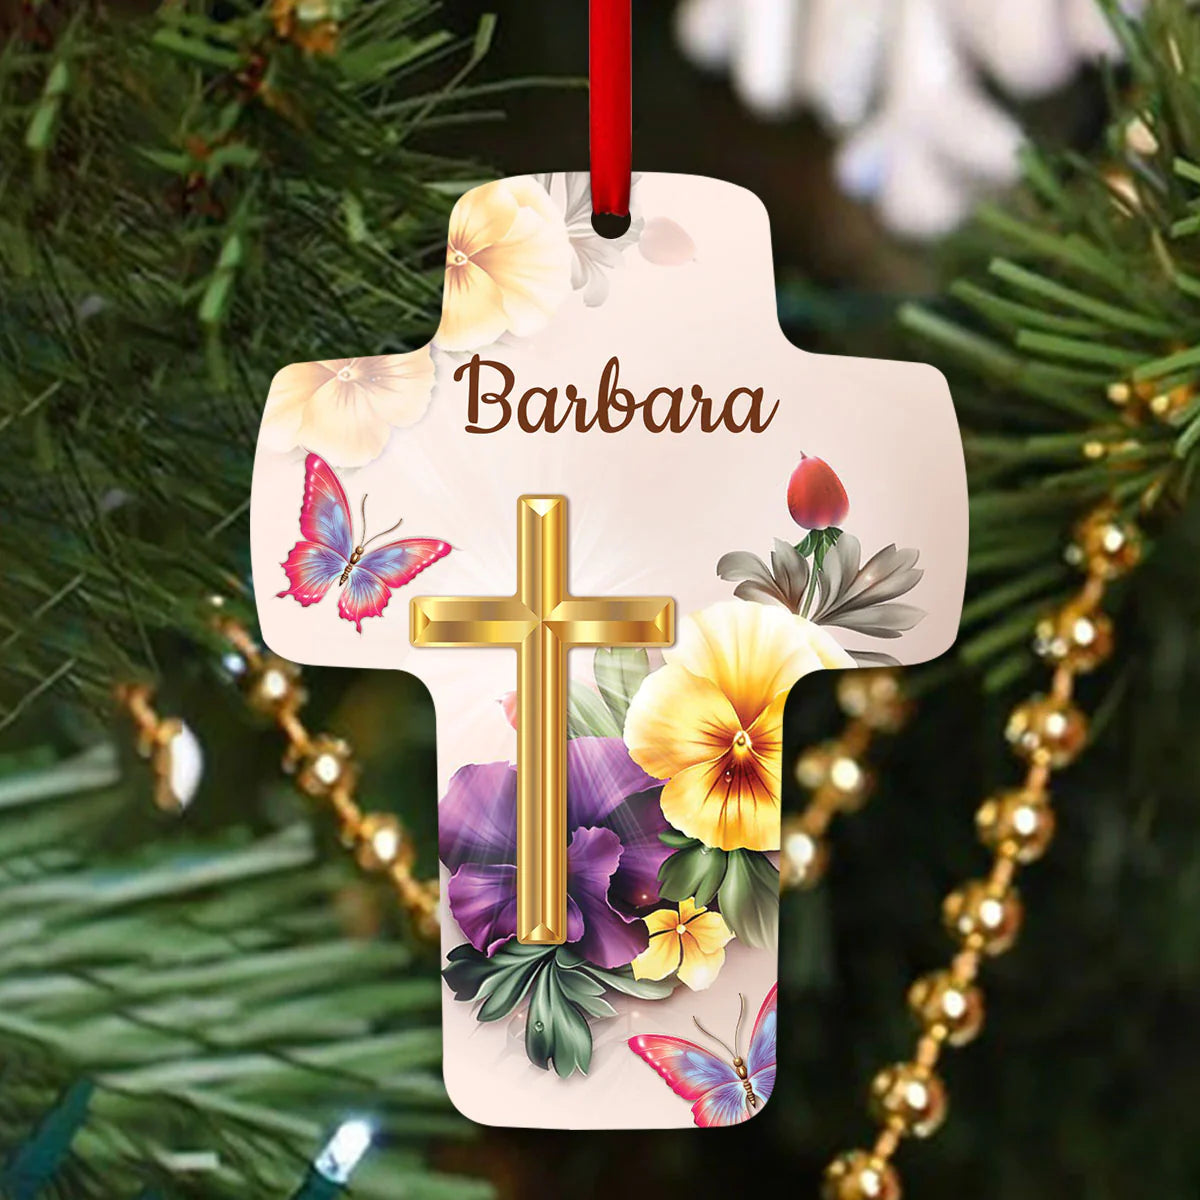 Christianartbag Ornament, Blessing You With Tender, Cross And Flower, Christmas Ornament, Christmas Gift, Personalized Ornament. - Christian Art Bag